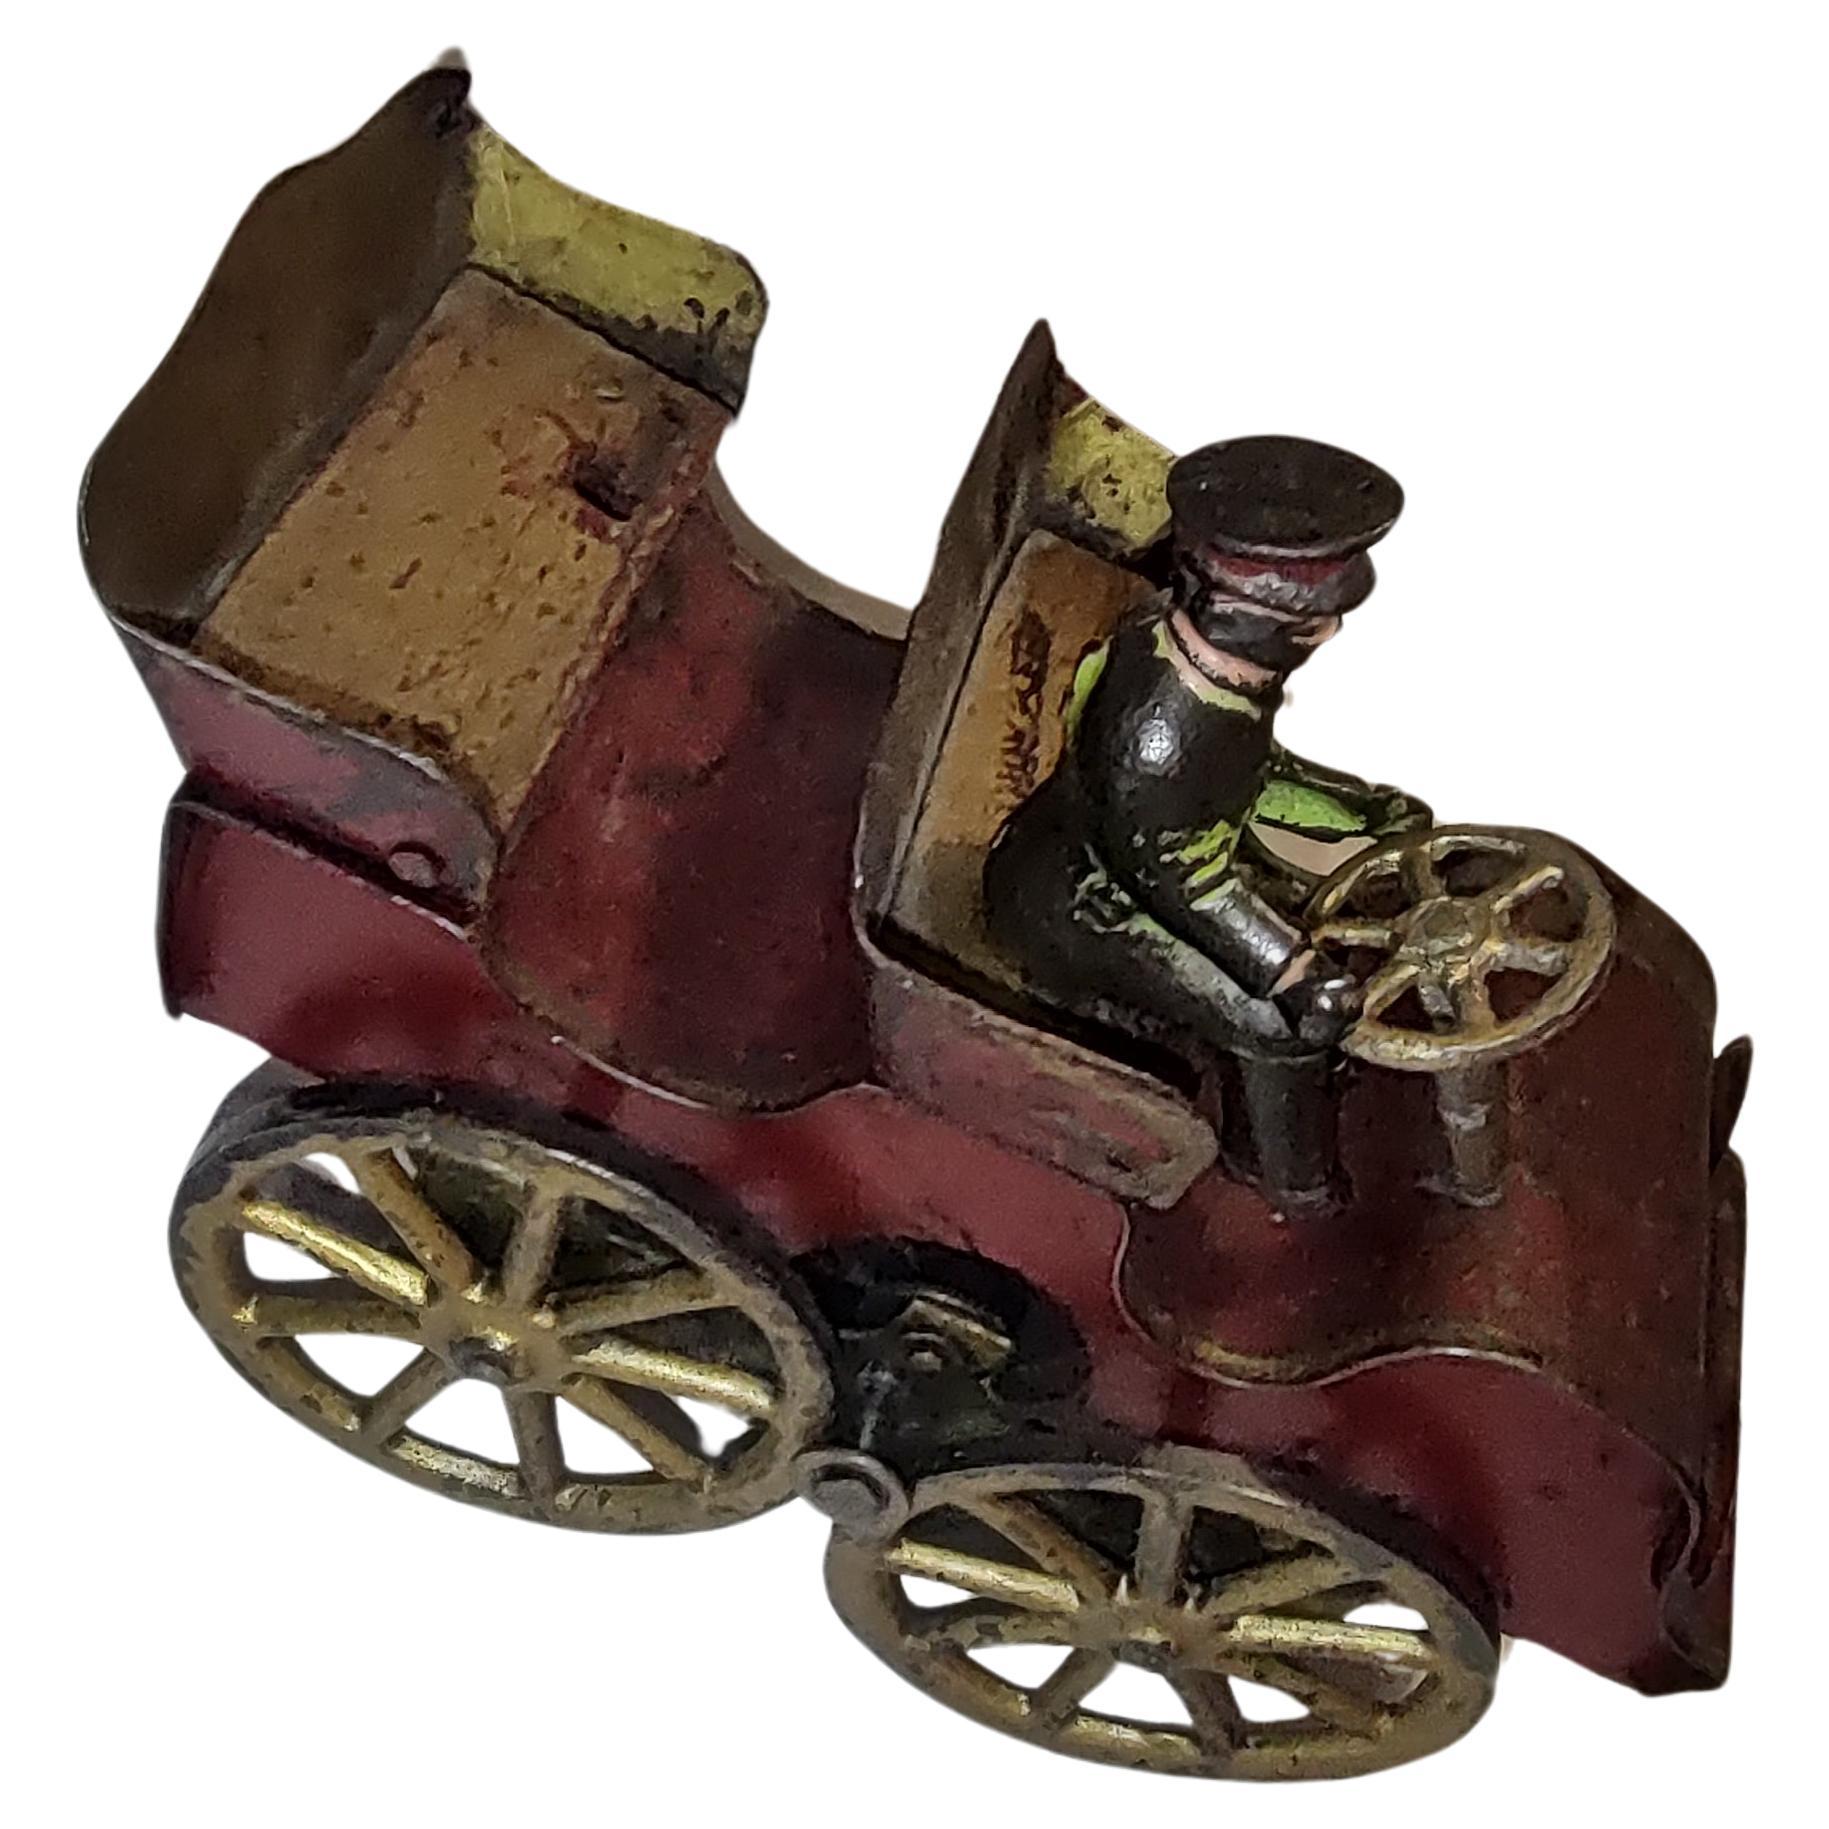 American Tin & Wood Open Touring Hill Climber Toy Car by Clark, circa 1903 For Sale